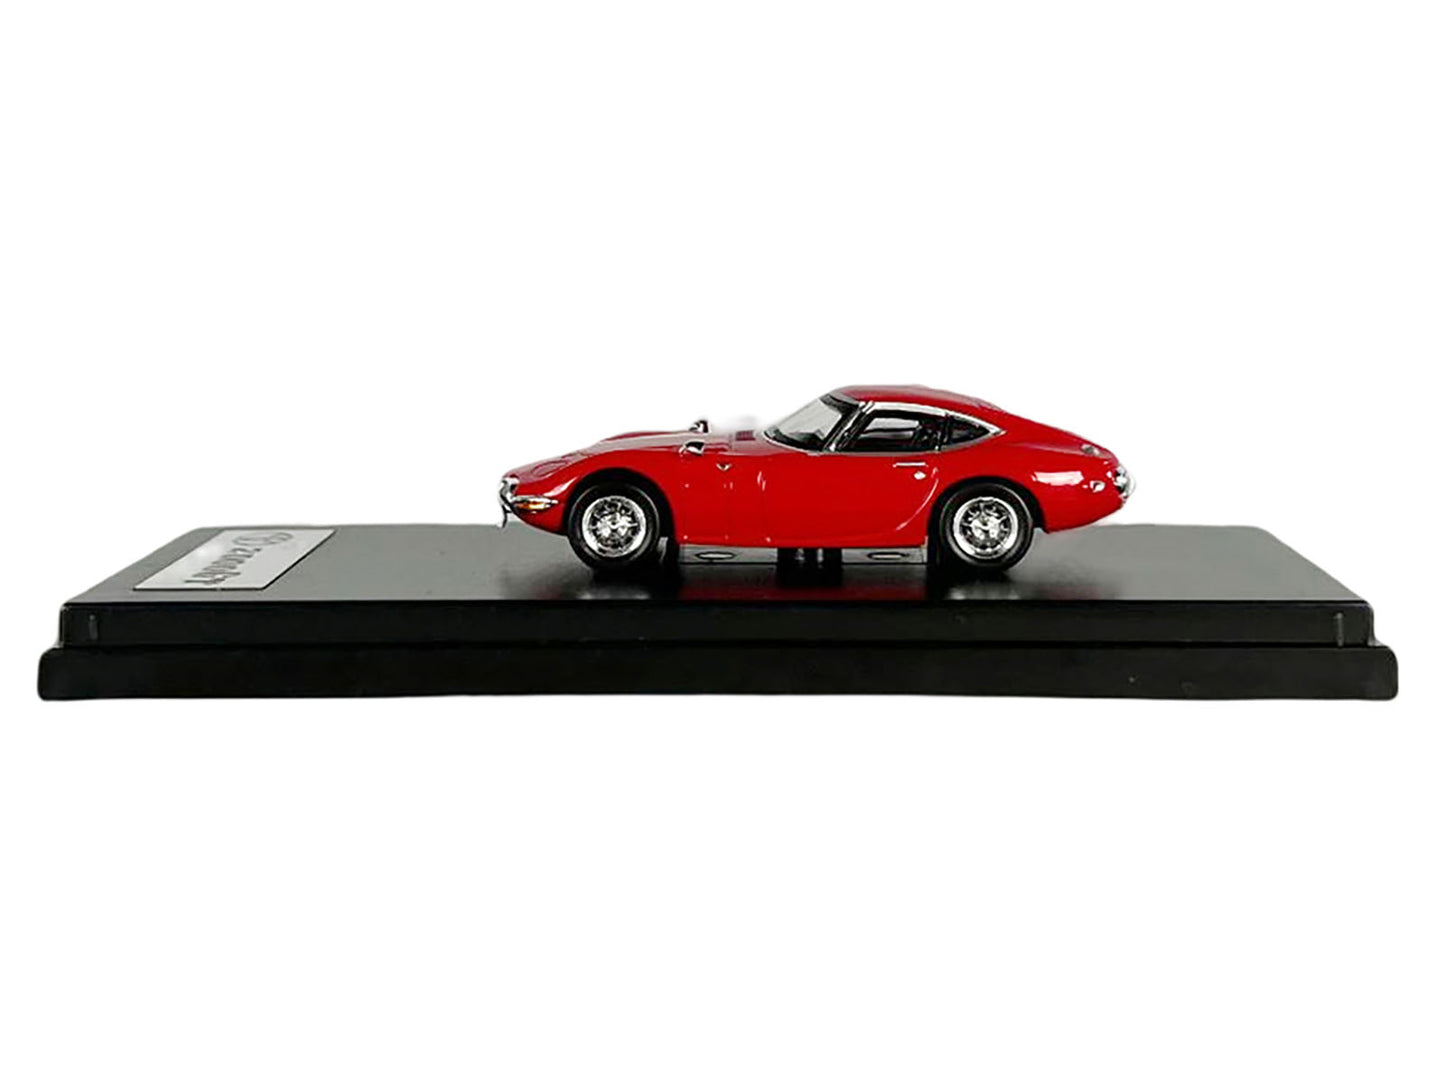 Brand new 1/64 scale diecast car model of Toyota 2000GT RHD (Right Hand Drive) Red die cast model car by LCD Models.
Br